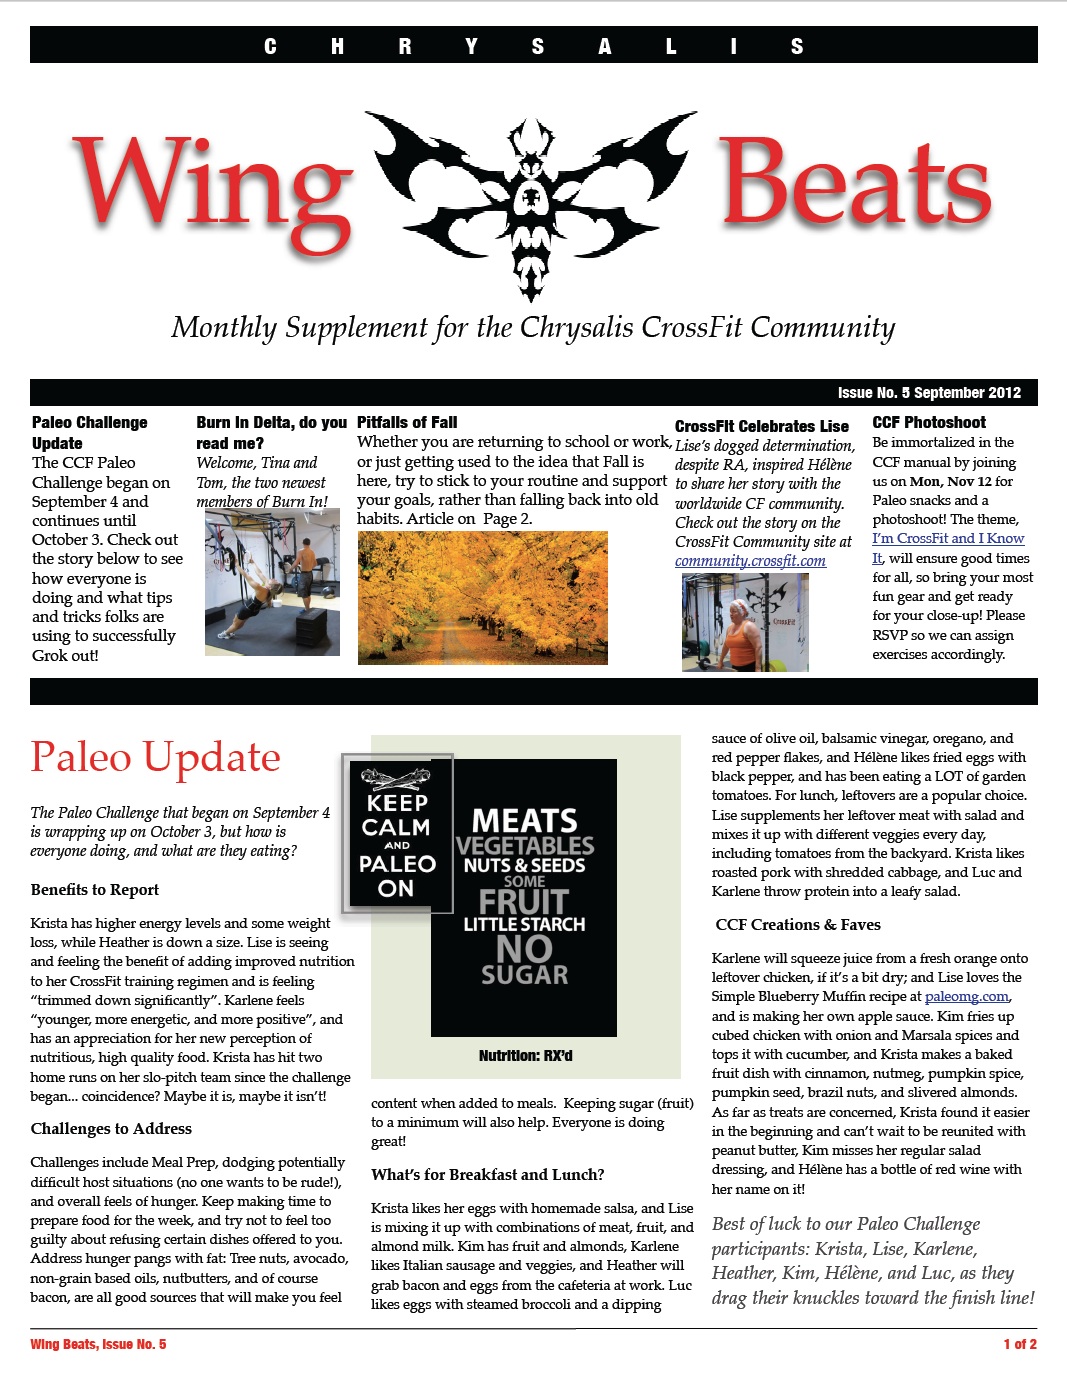 WingBeats Issue #5 - September 2012